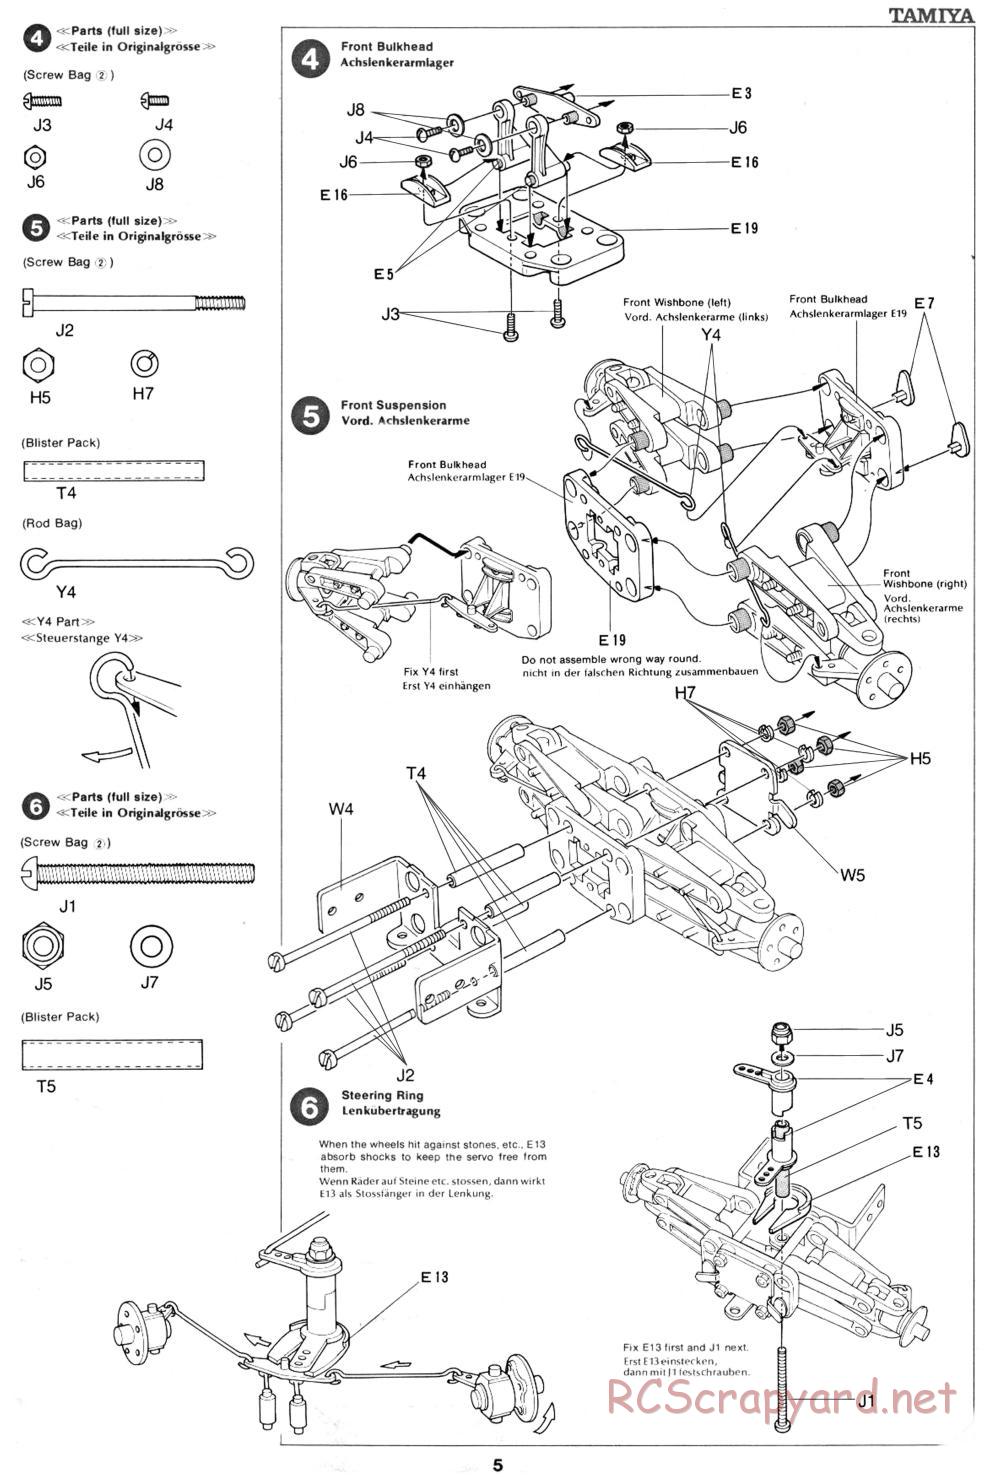 Tamiya - XR311 Combat Support Vehicle (1977) Chassis - Manual - Page 5